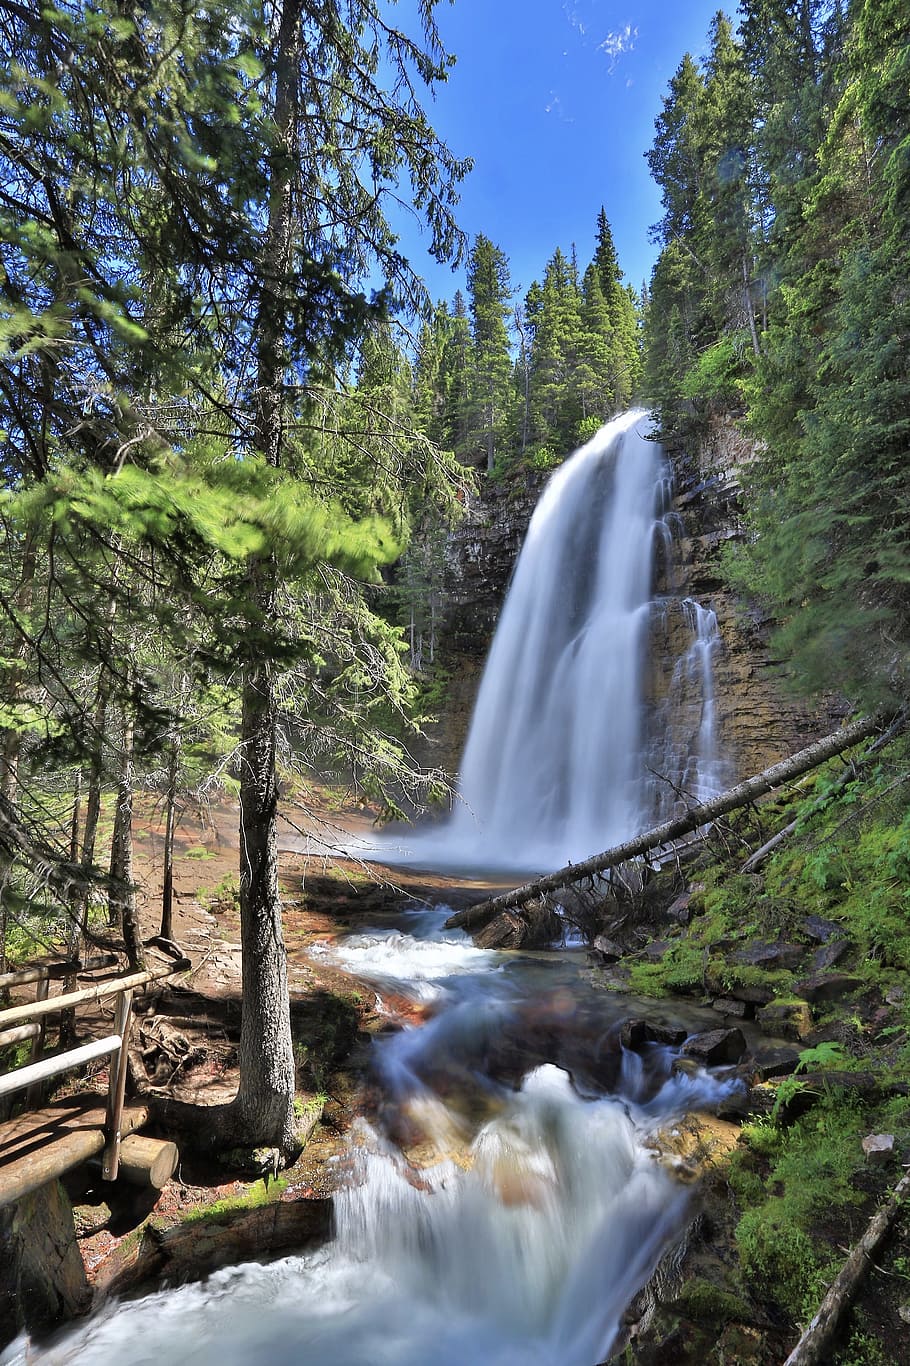 virginia falls, glacier national park, waterfalls, scenery, hiking, trail, forest, wood, flowing, water